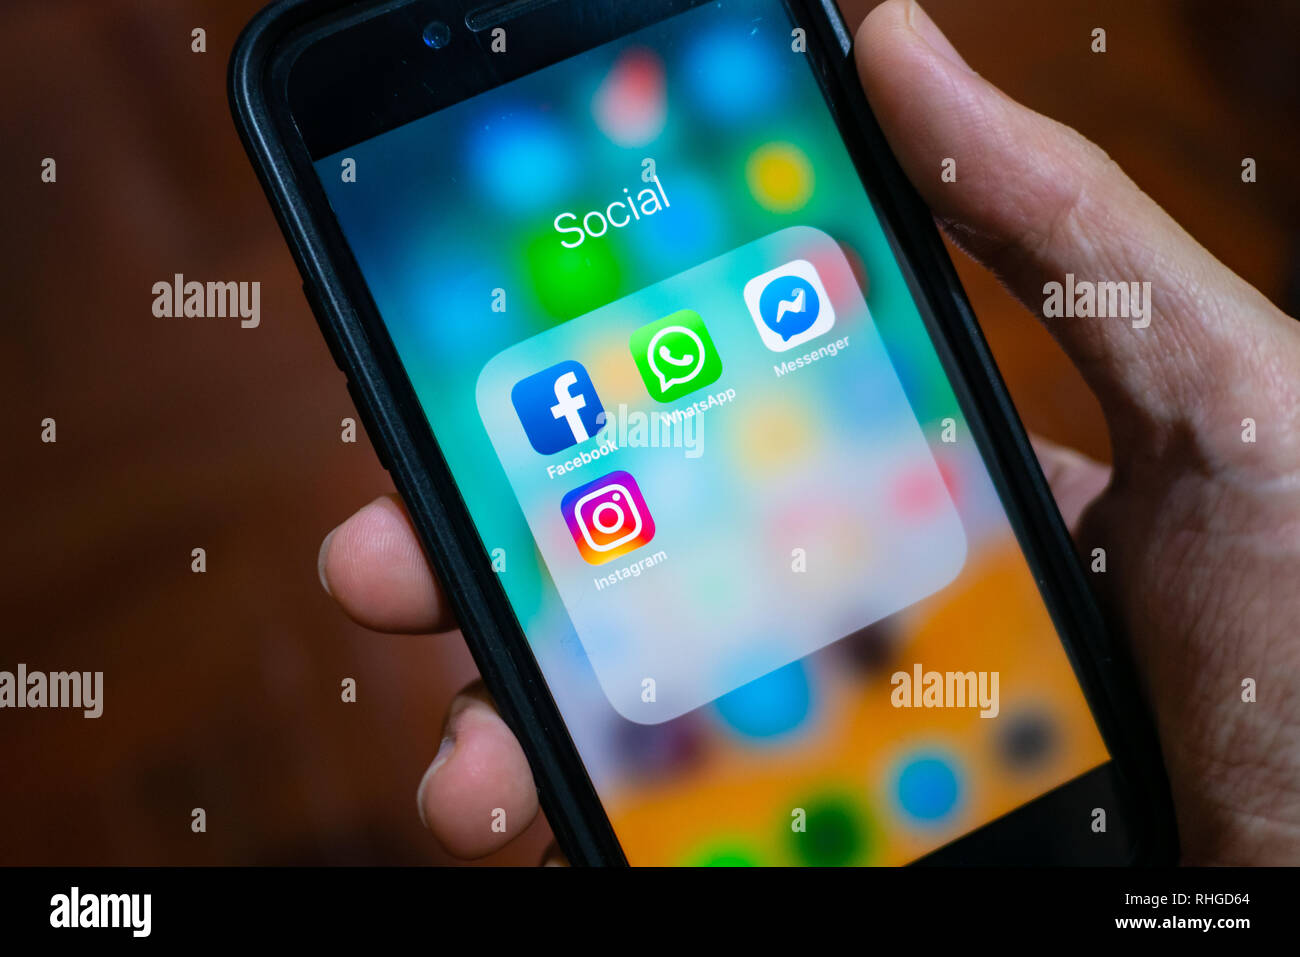 Bangkok, Thailand - January 31, 2019: iPhone 7 showing its screen with Facebook, WhatsApp, Messenger and Instagram application icons. Stock Photo